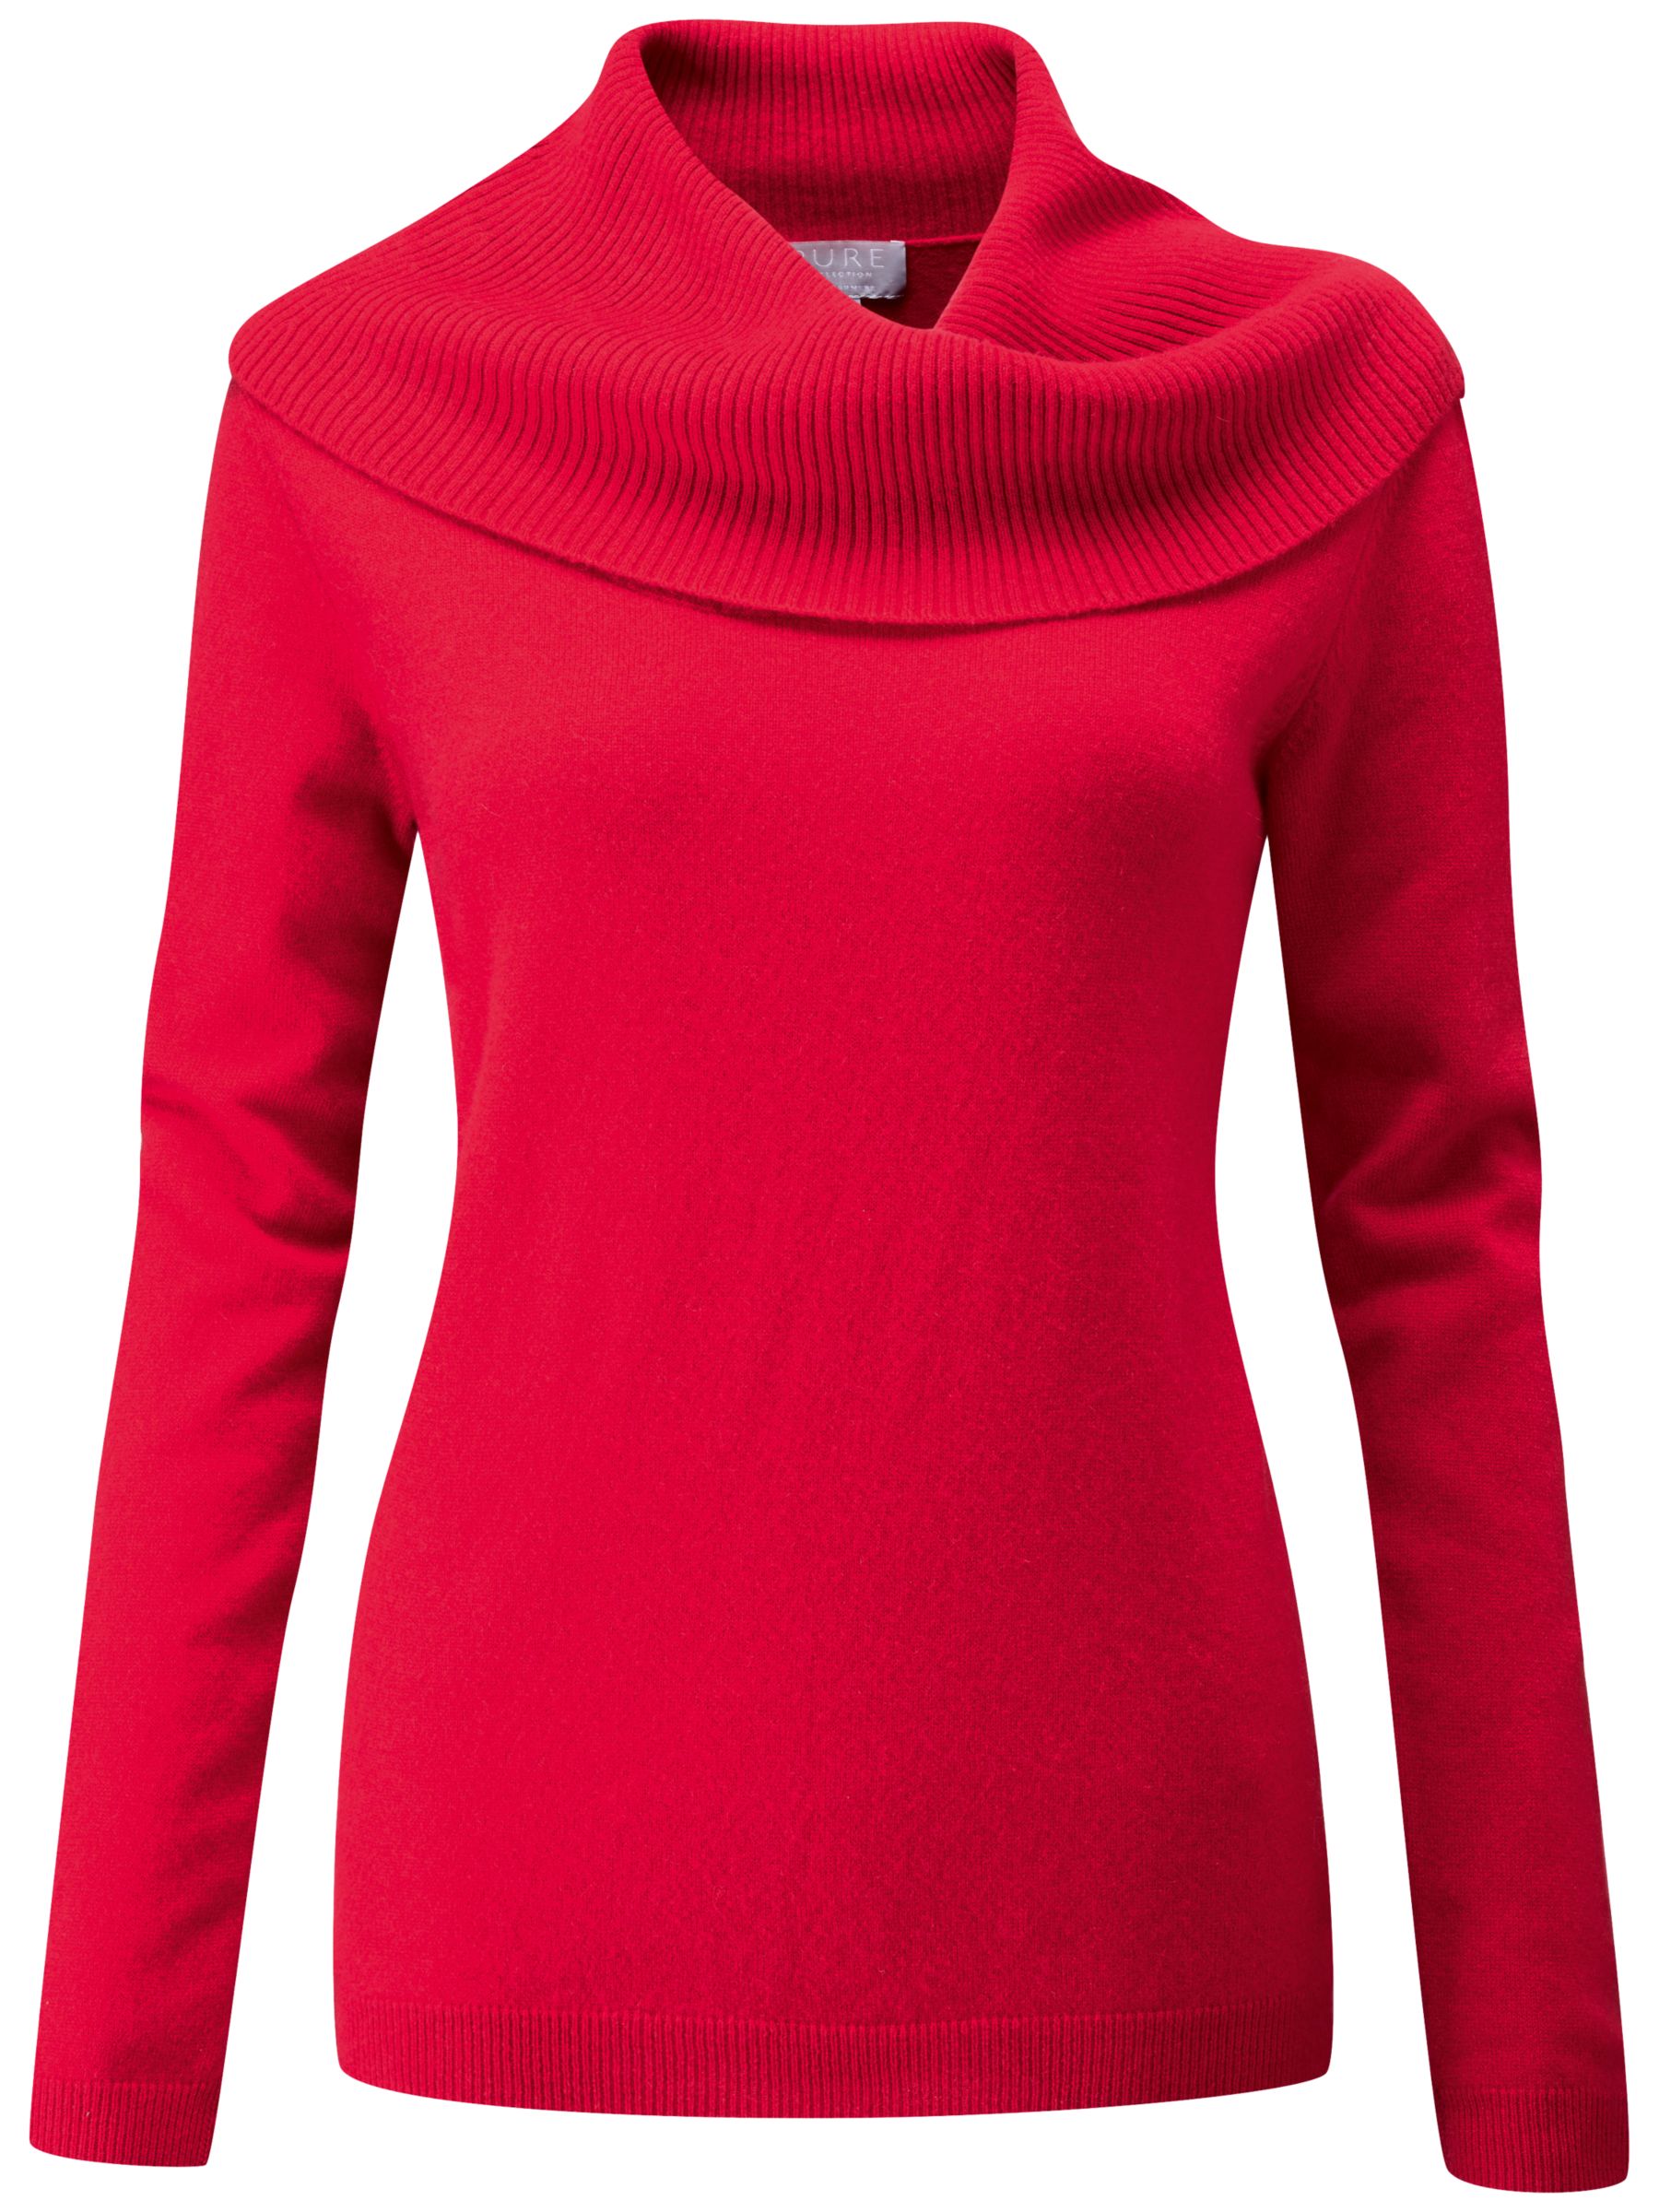 red cowl neck sweater